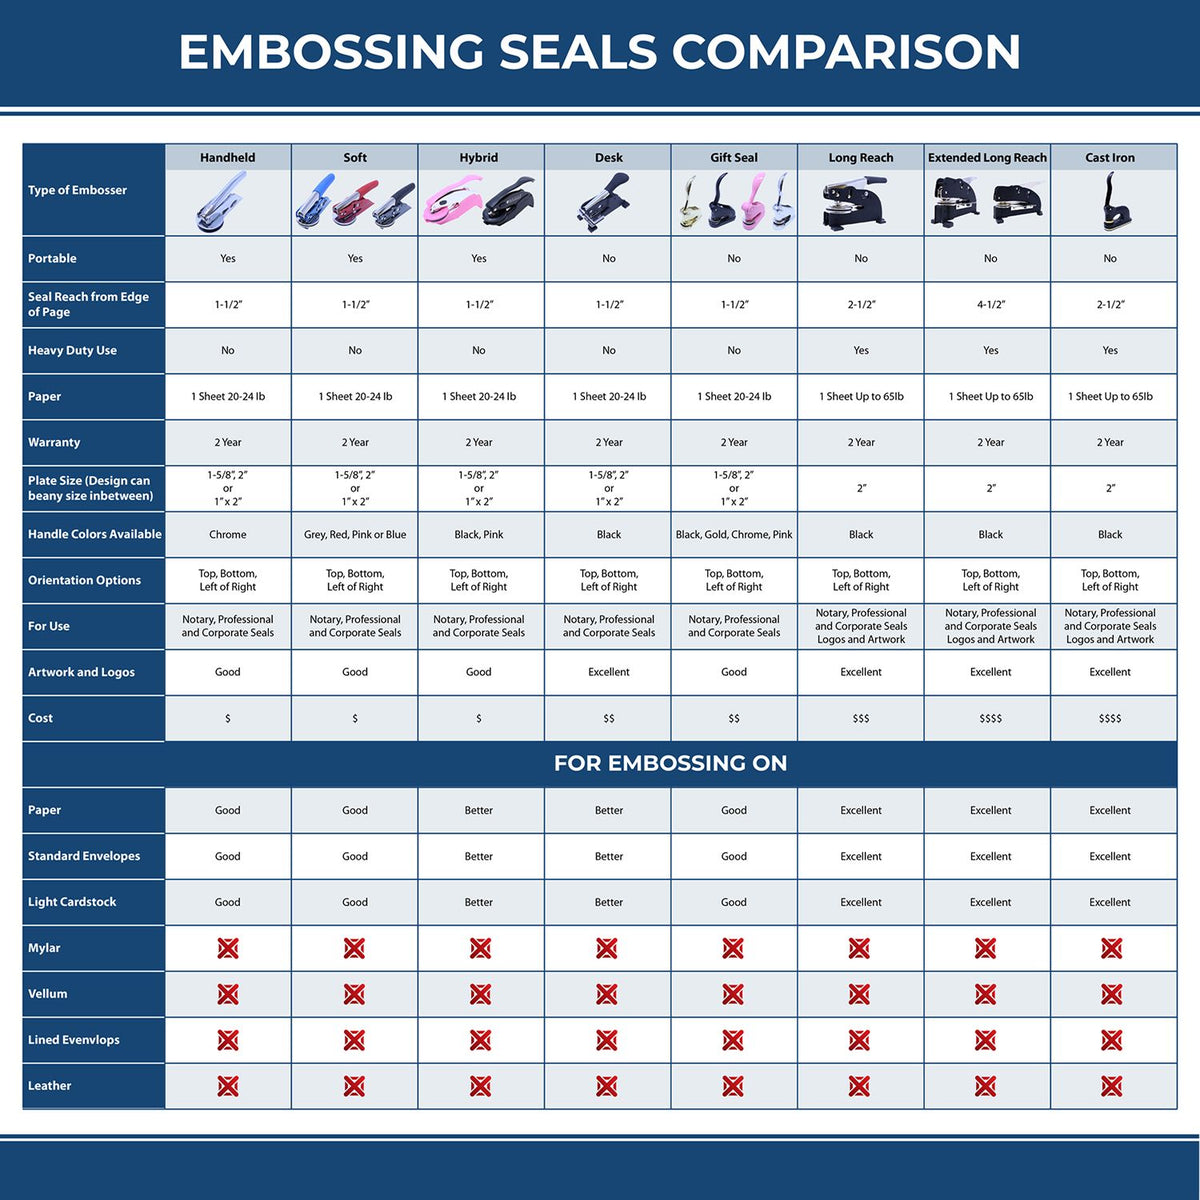 A comparison chart for the different types of mount models available for the Gift Missouri Land Surveyor Seal